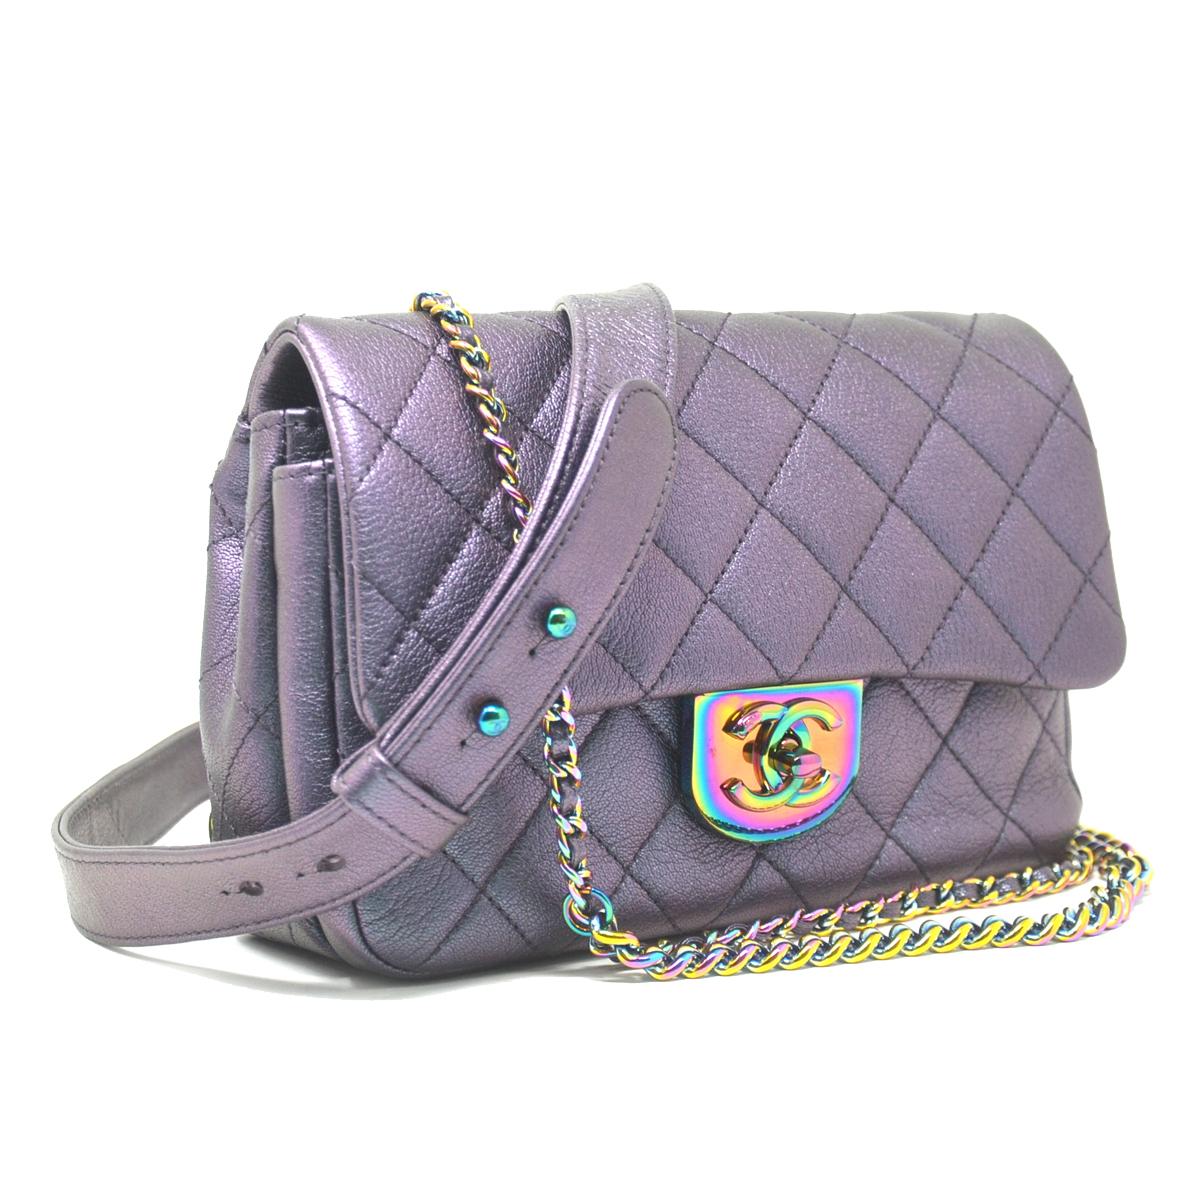 Company-Chanel
Model-Iridescent Quilted Small Double Carry Waist Chain Flap 
Color-Purple 
Date Code-21927126
Material-Goatskin Quilted
Measurements-8.25